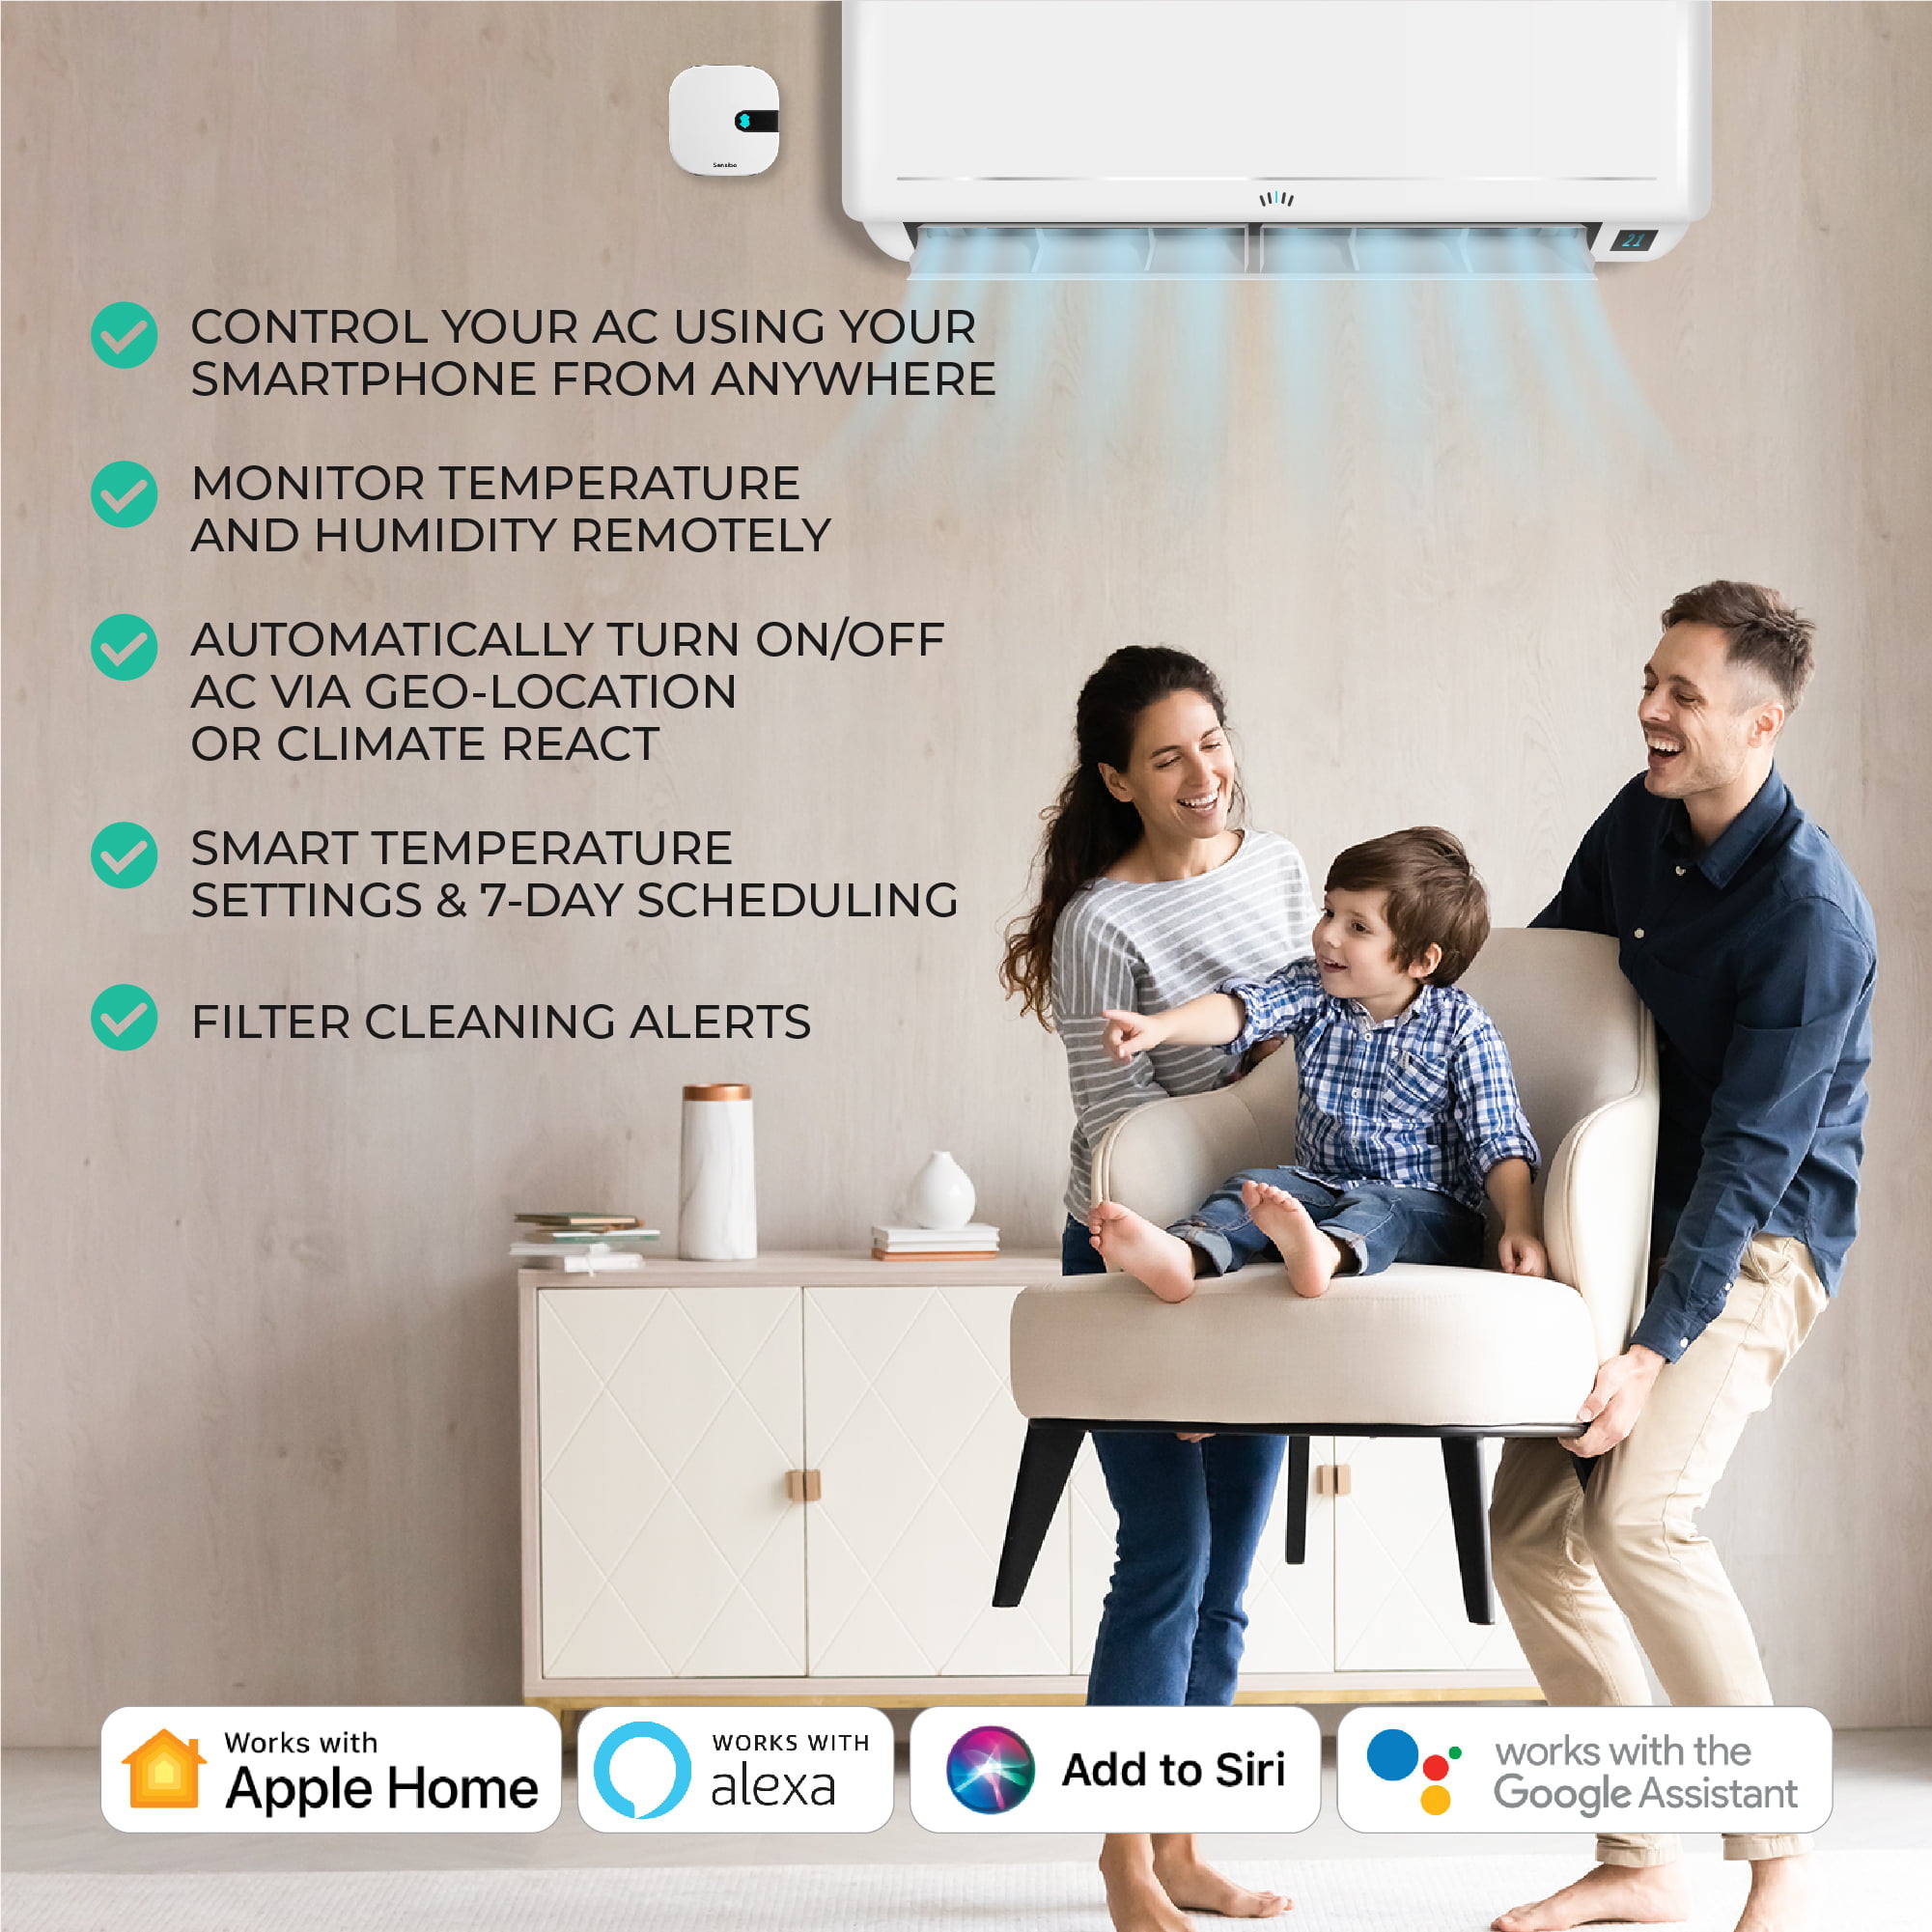 Make your air conditioner smart and frugal with a Sensibo AC